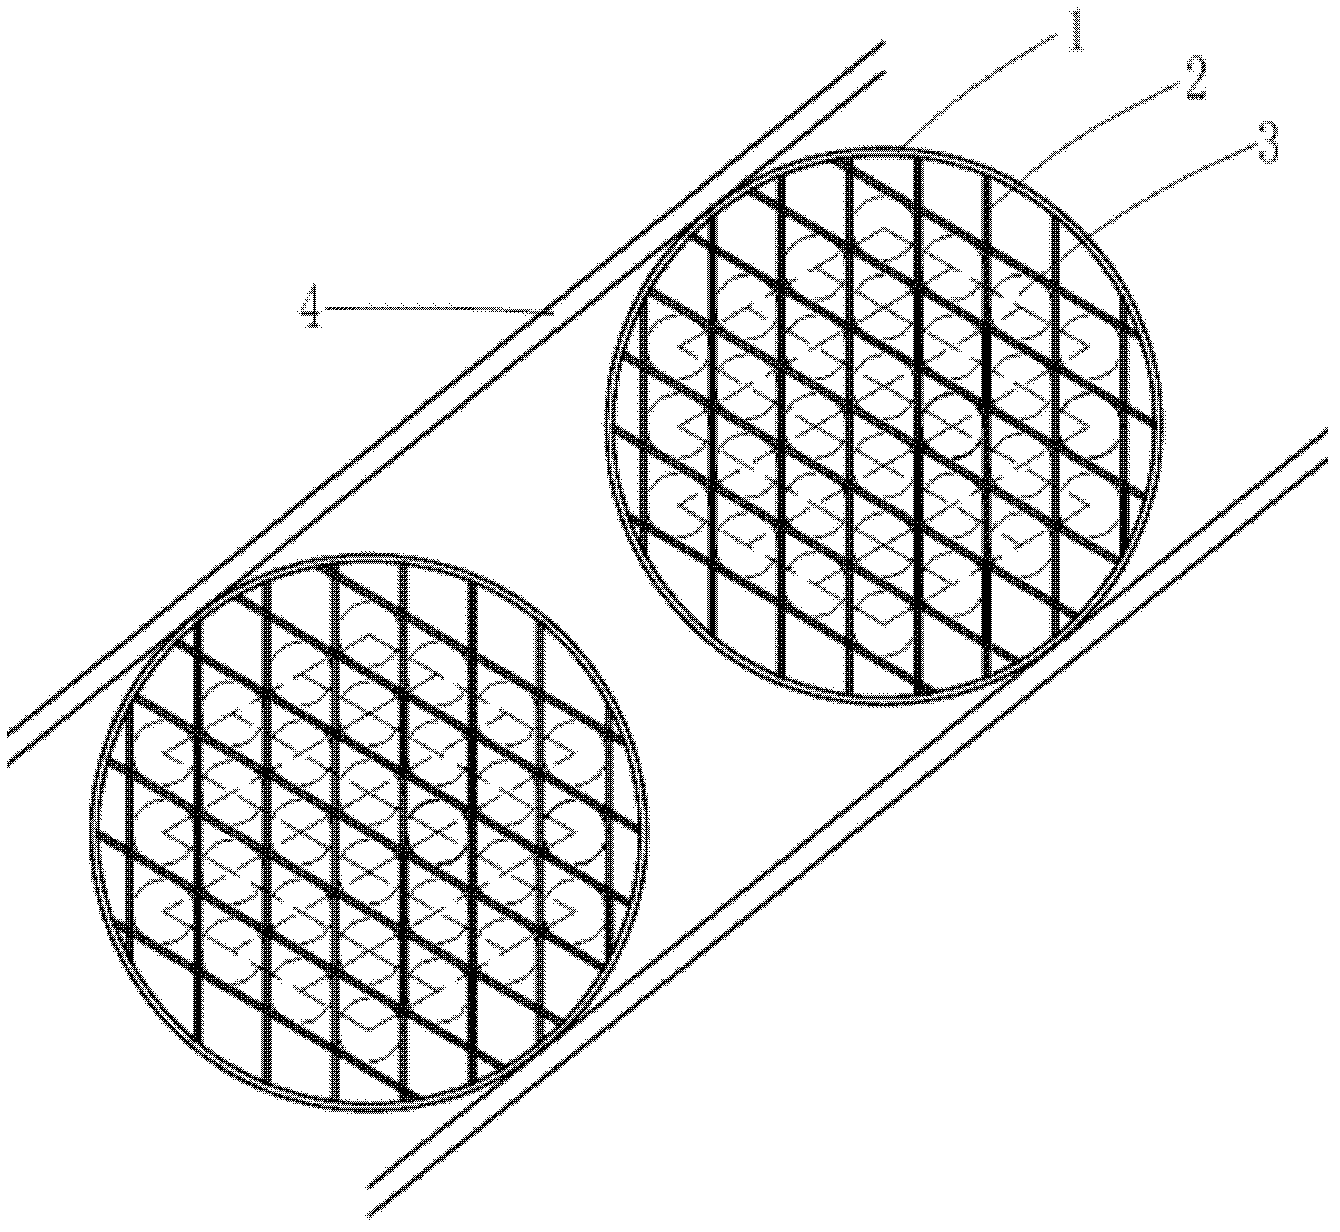 Grid type supporting baffling device of shell-and-tube heat exchanger